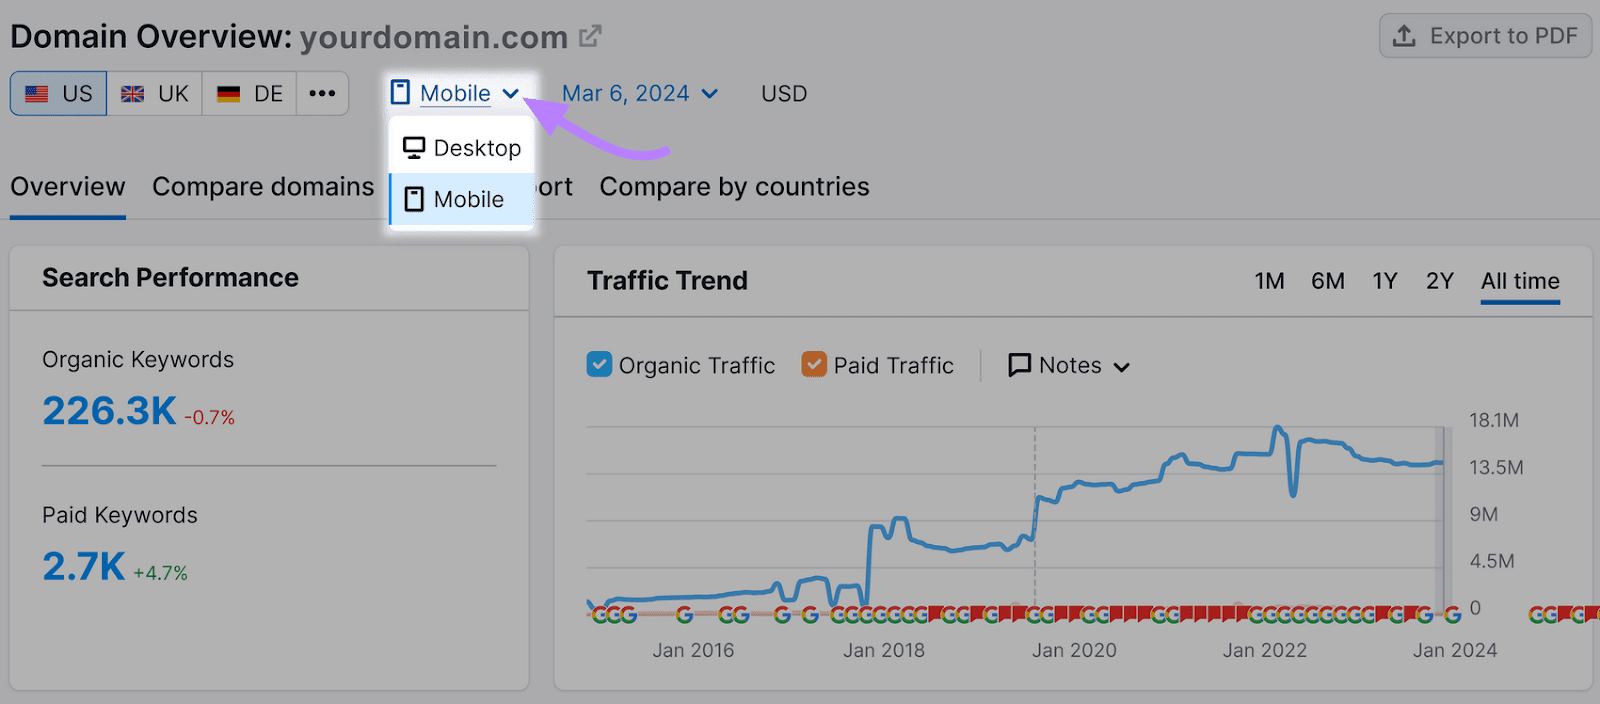 "Mobile" selected in Semrush's Domain Overview tool